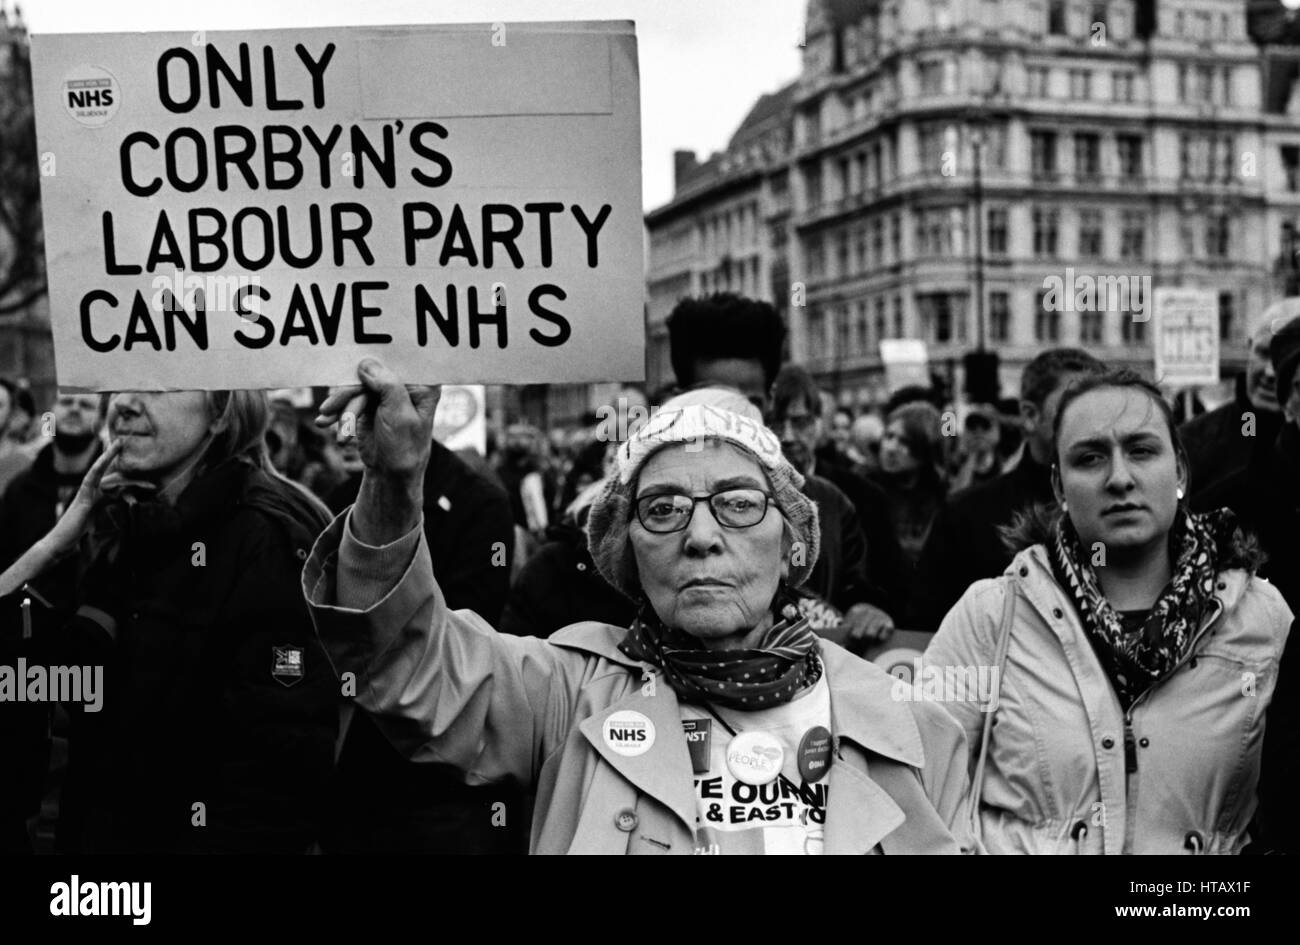 London, UK. 4th Mar, 2017. A Corbyn supporter in Parliament Square at a protest in support of the NHS and against cuts. Thousands of protesters turned out to march from Tavistock Square to Parliament Square as part of the #OurNHS protest. Photograph shot on 35mm black and white Kodak Tri-X film. Stock Photo